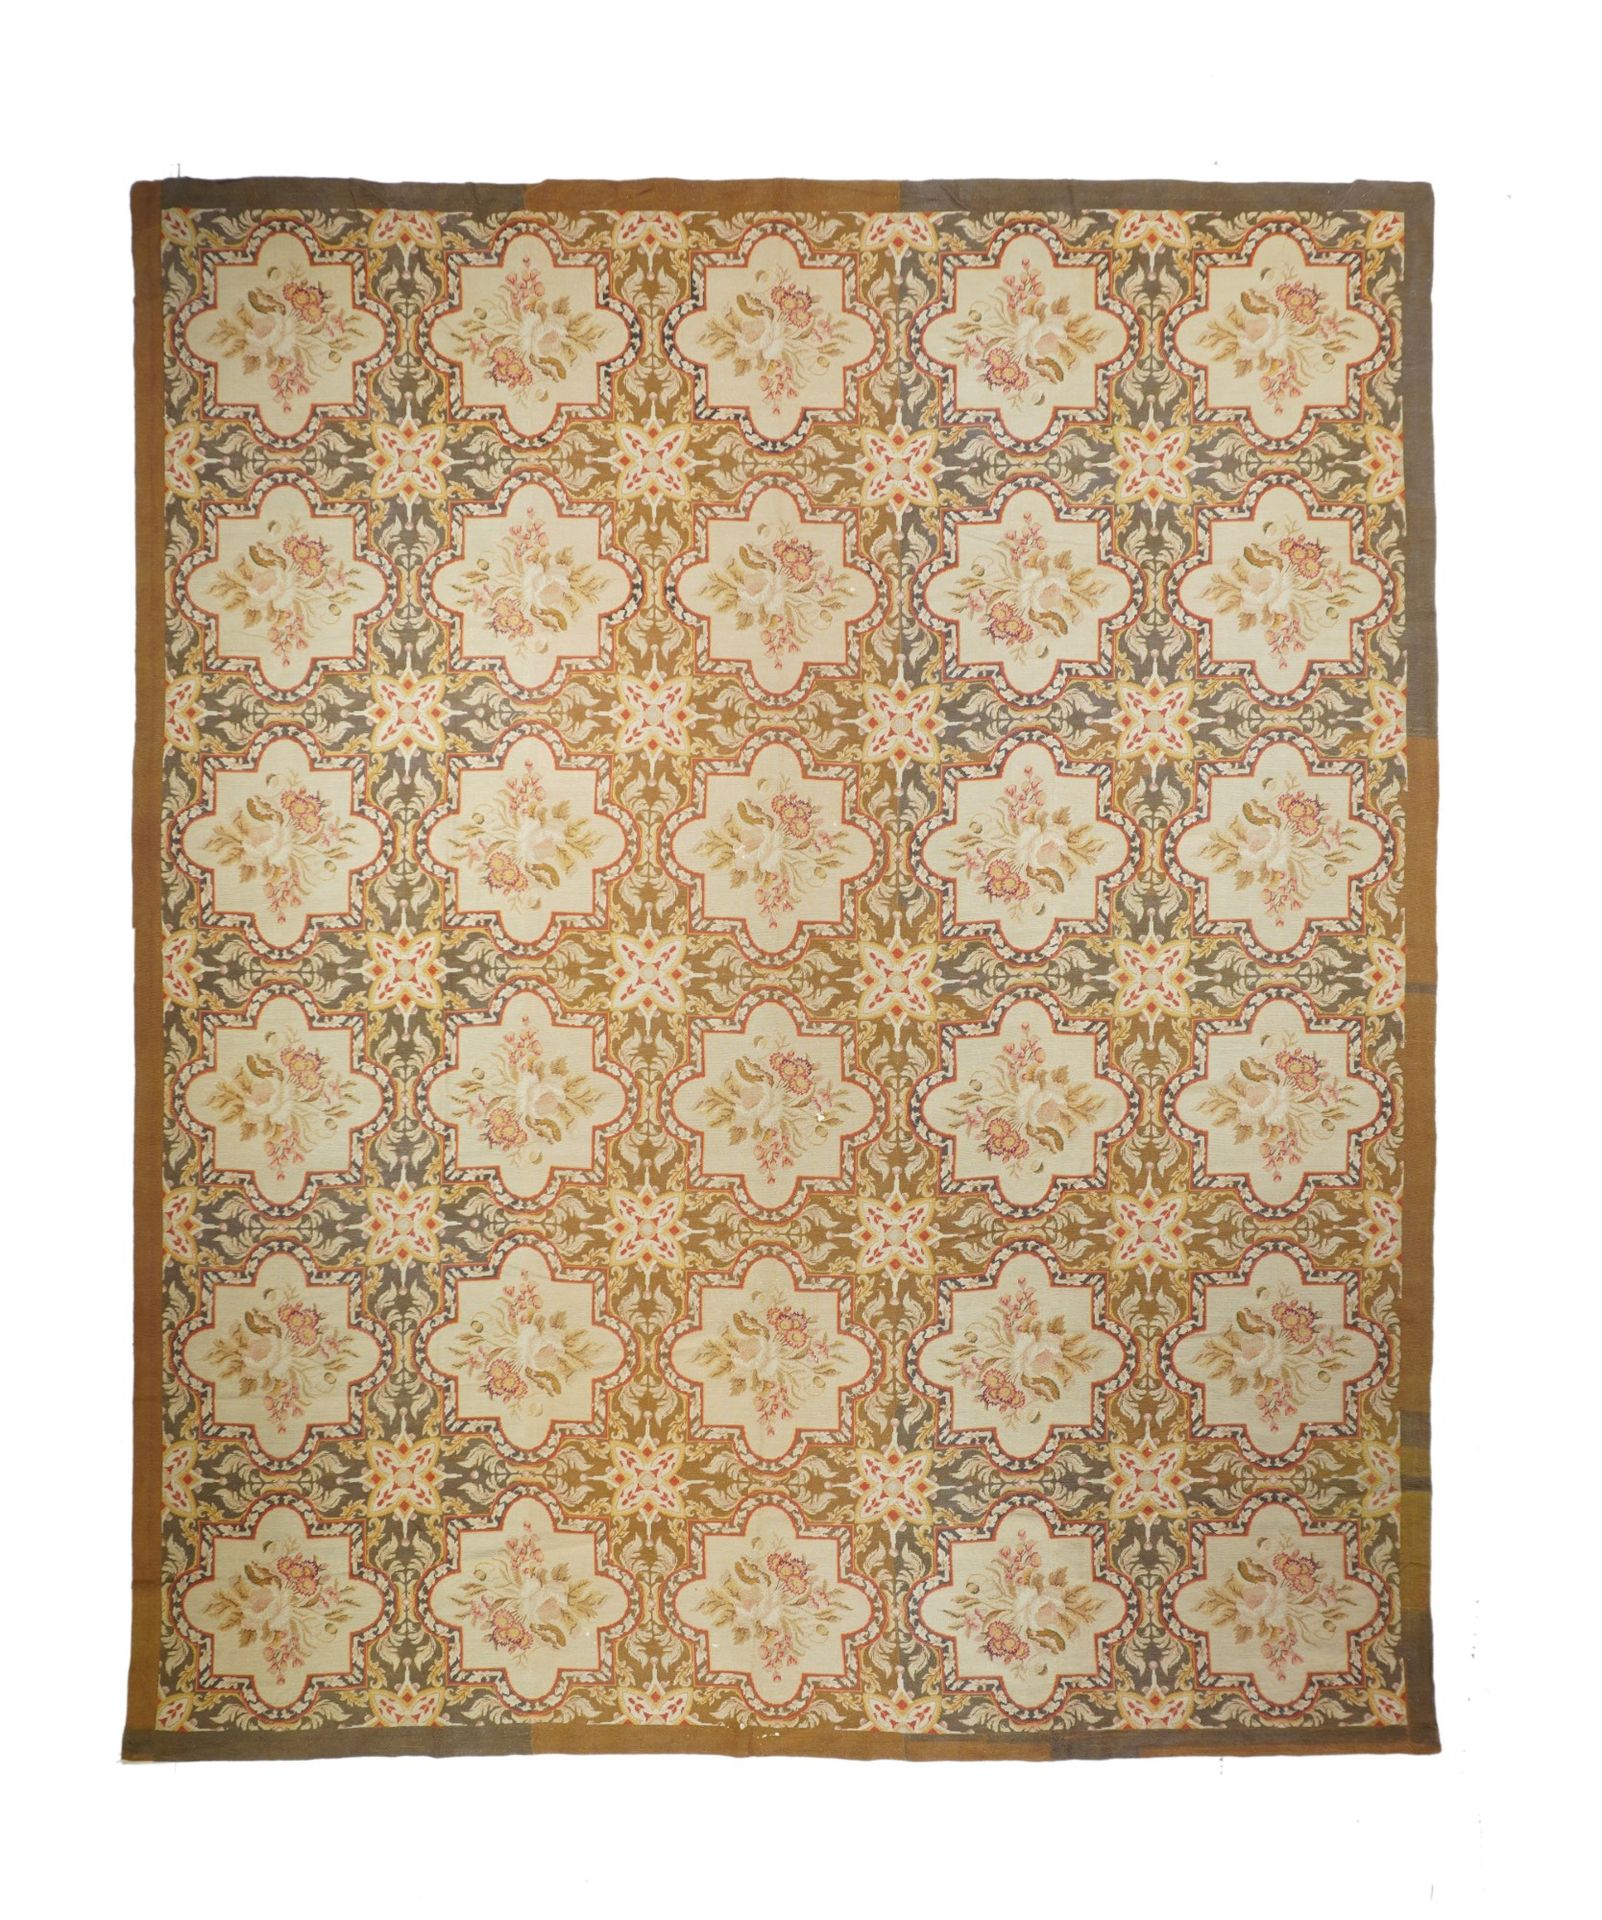 Null Needle Point Rug, 9'9" x 11'11" ( 2.97 x 3.63 M )